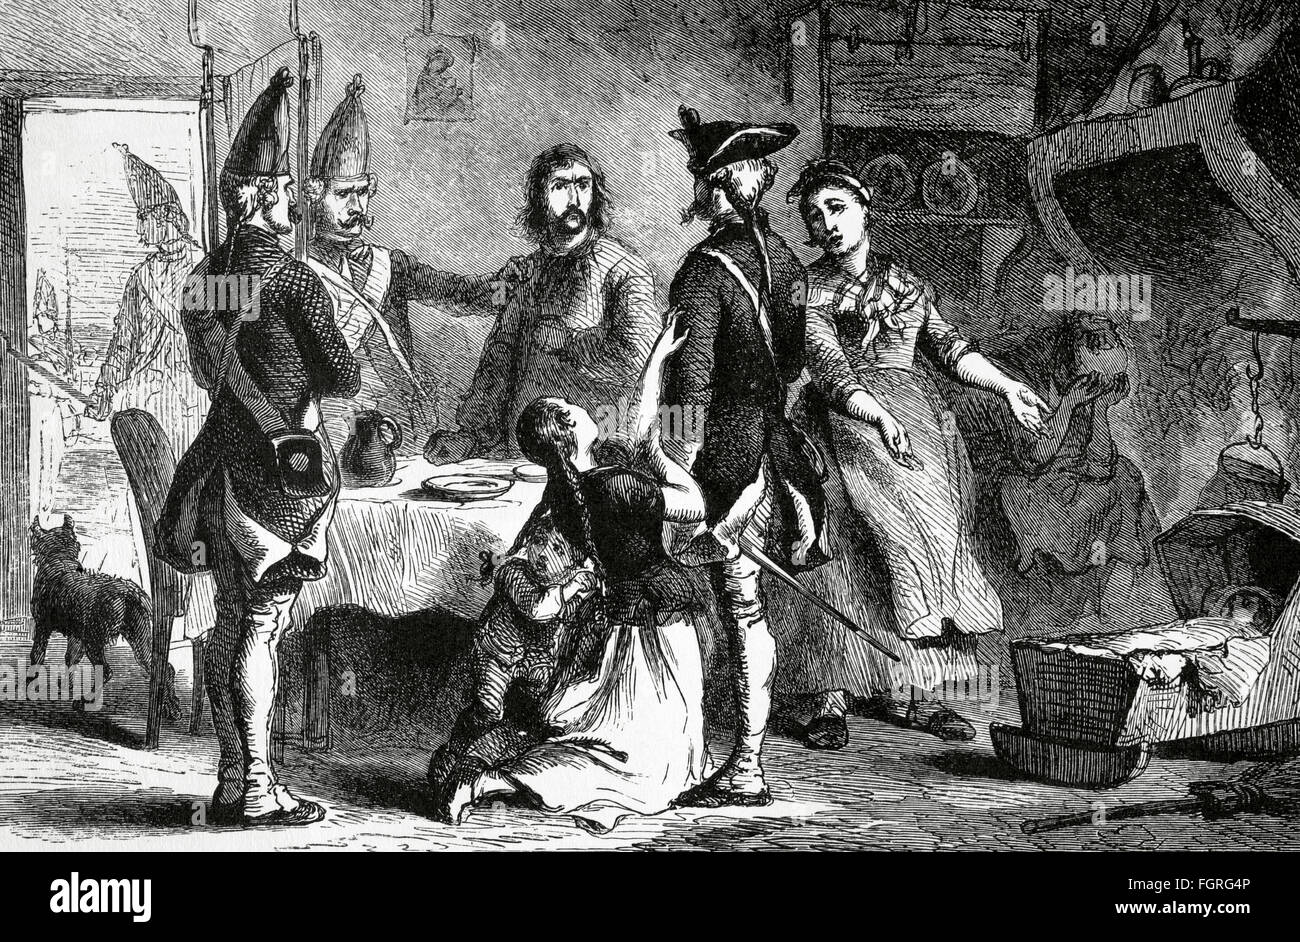 American Revolutionary War (1775-1783). Hessian recruited as a soldier by the British military service while his family begs them not to recruit him. They are most widely associated with combat operations in the American War of Independence. Engraving by Darley. 19th century. Stock Photo